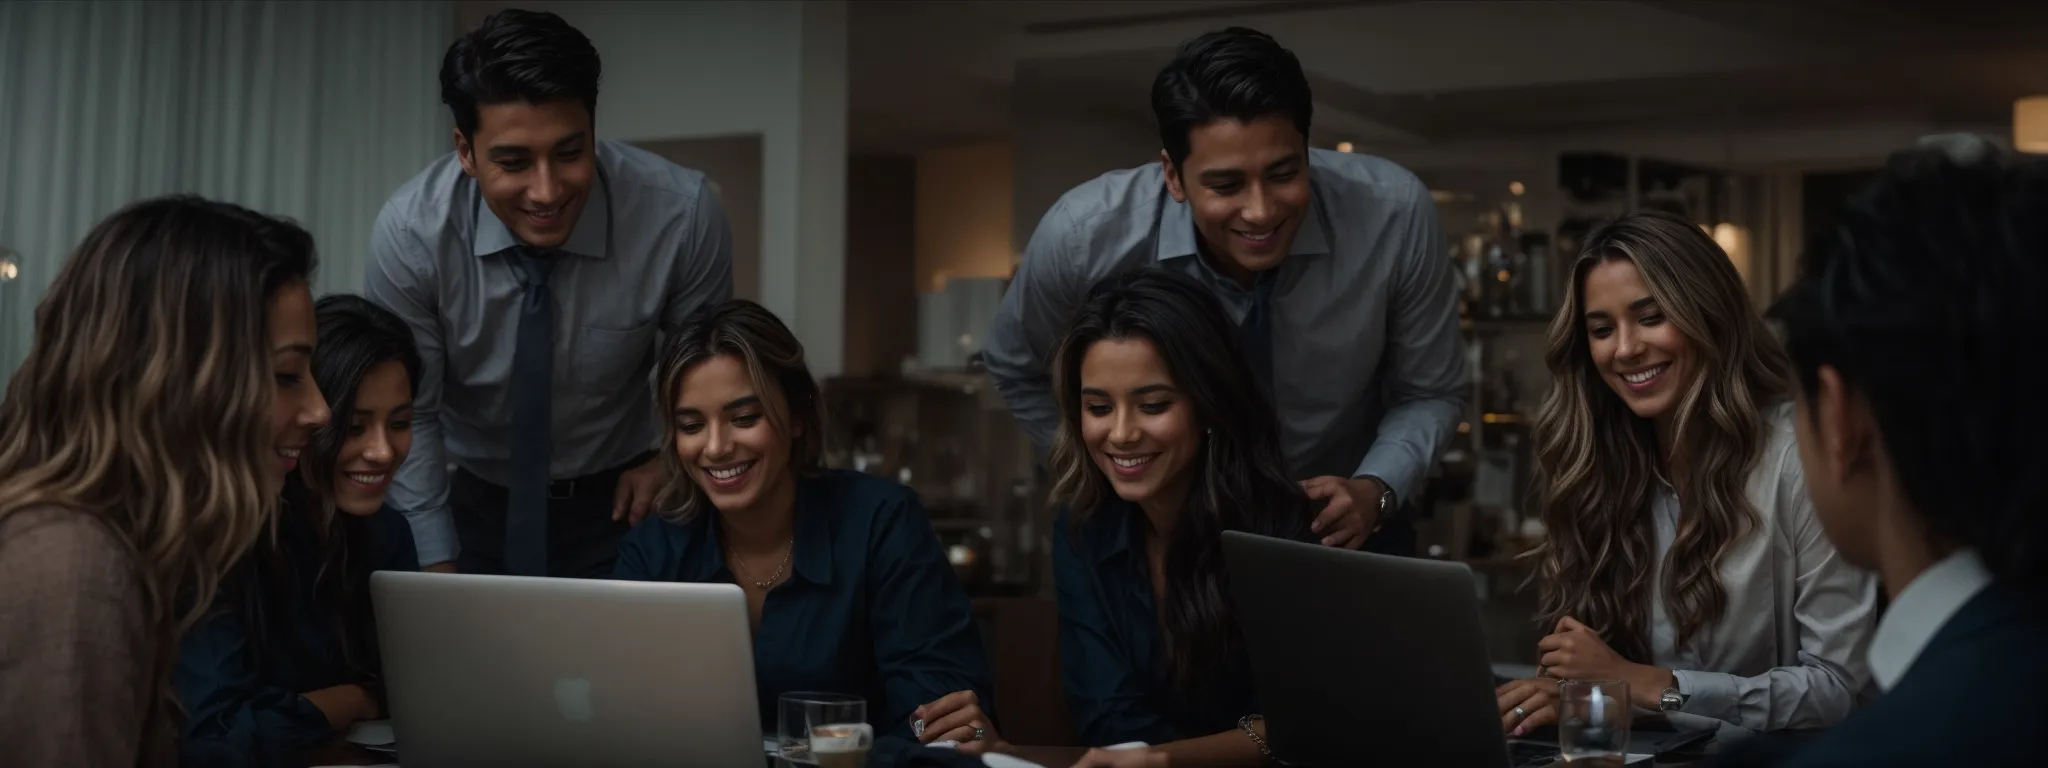 a group of smiling professionals celebrating around a laptop with a five-star rating displayed on the screen.